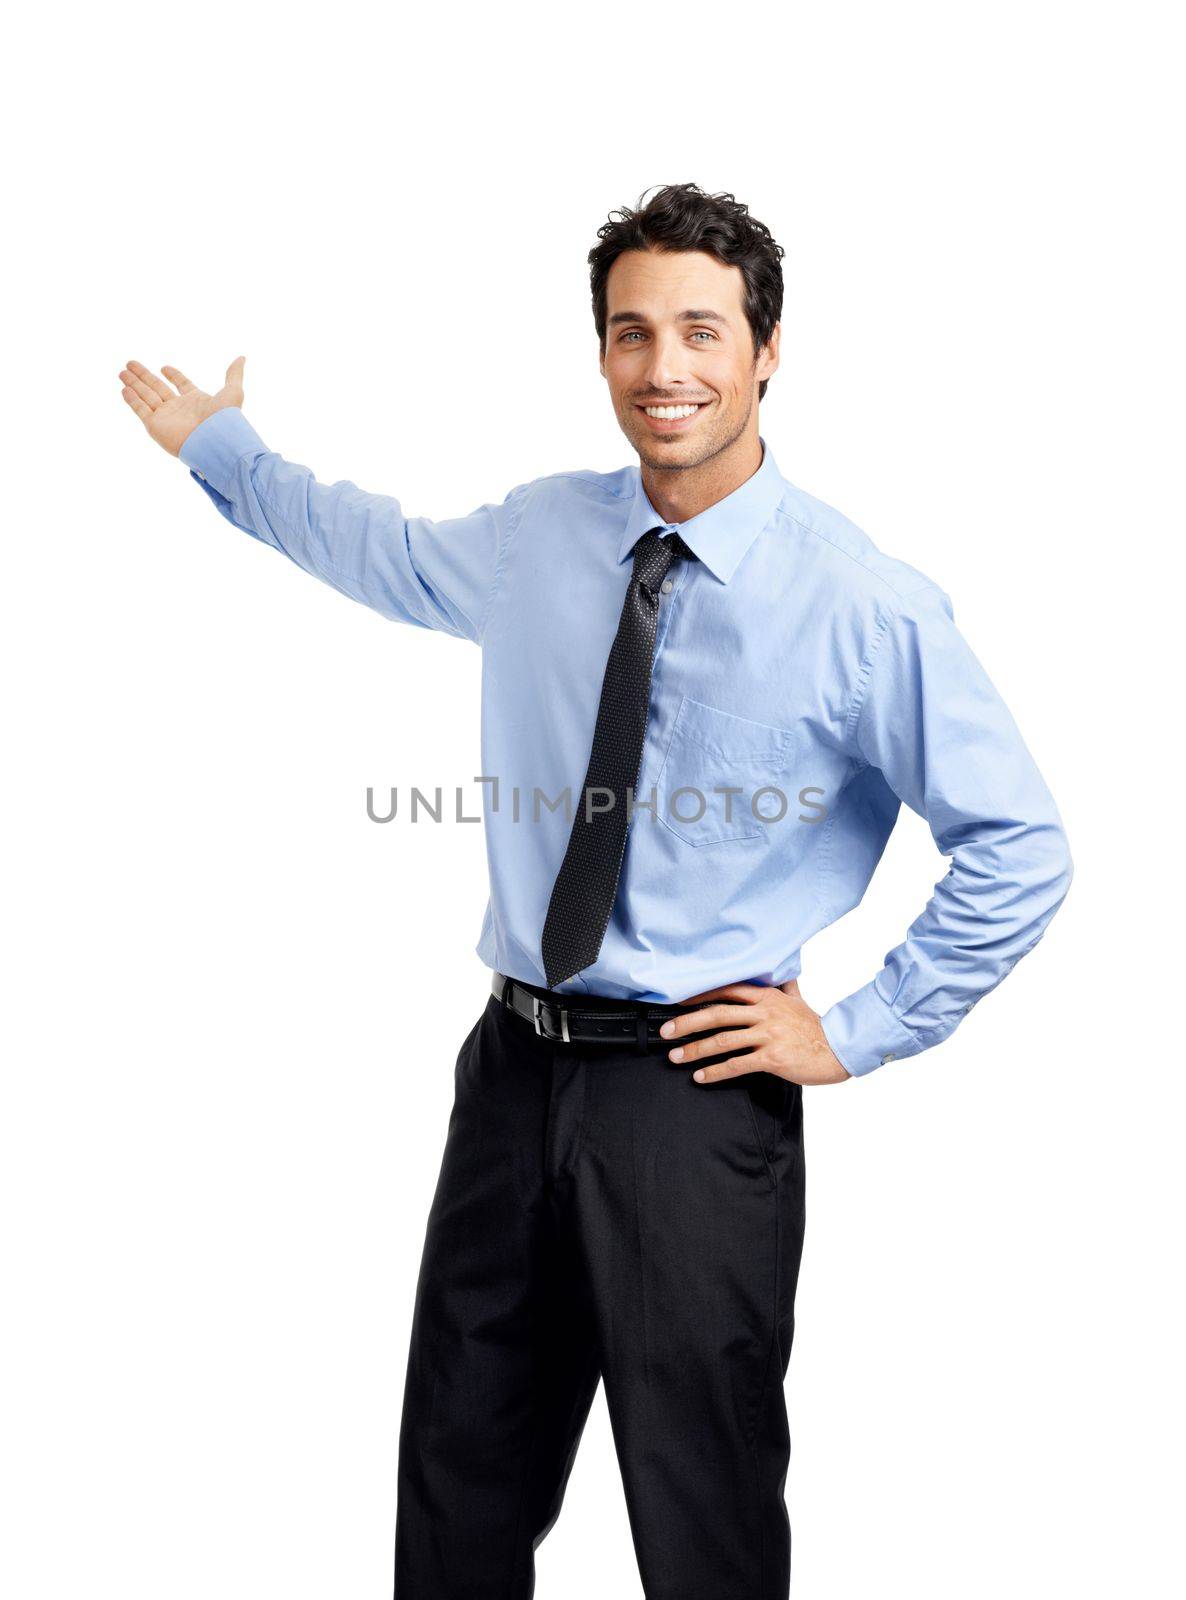 Portrait, business and man with presentation, corporate and speaker isolated on white studio background. Male employee, presenter and entrepreneur with feedback, smile and communication on backdrop.